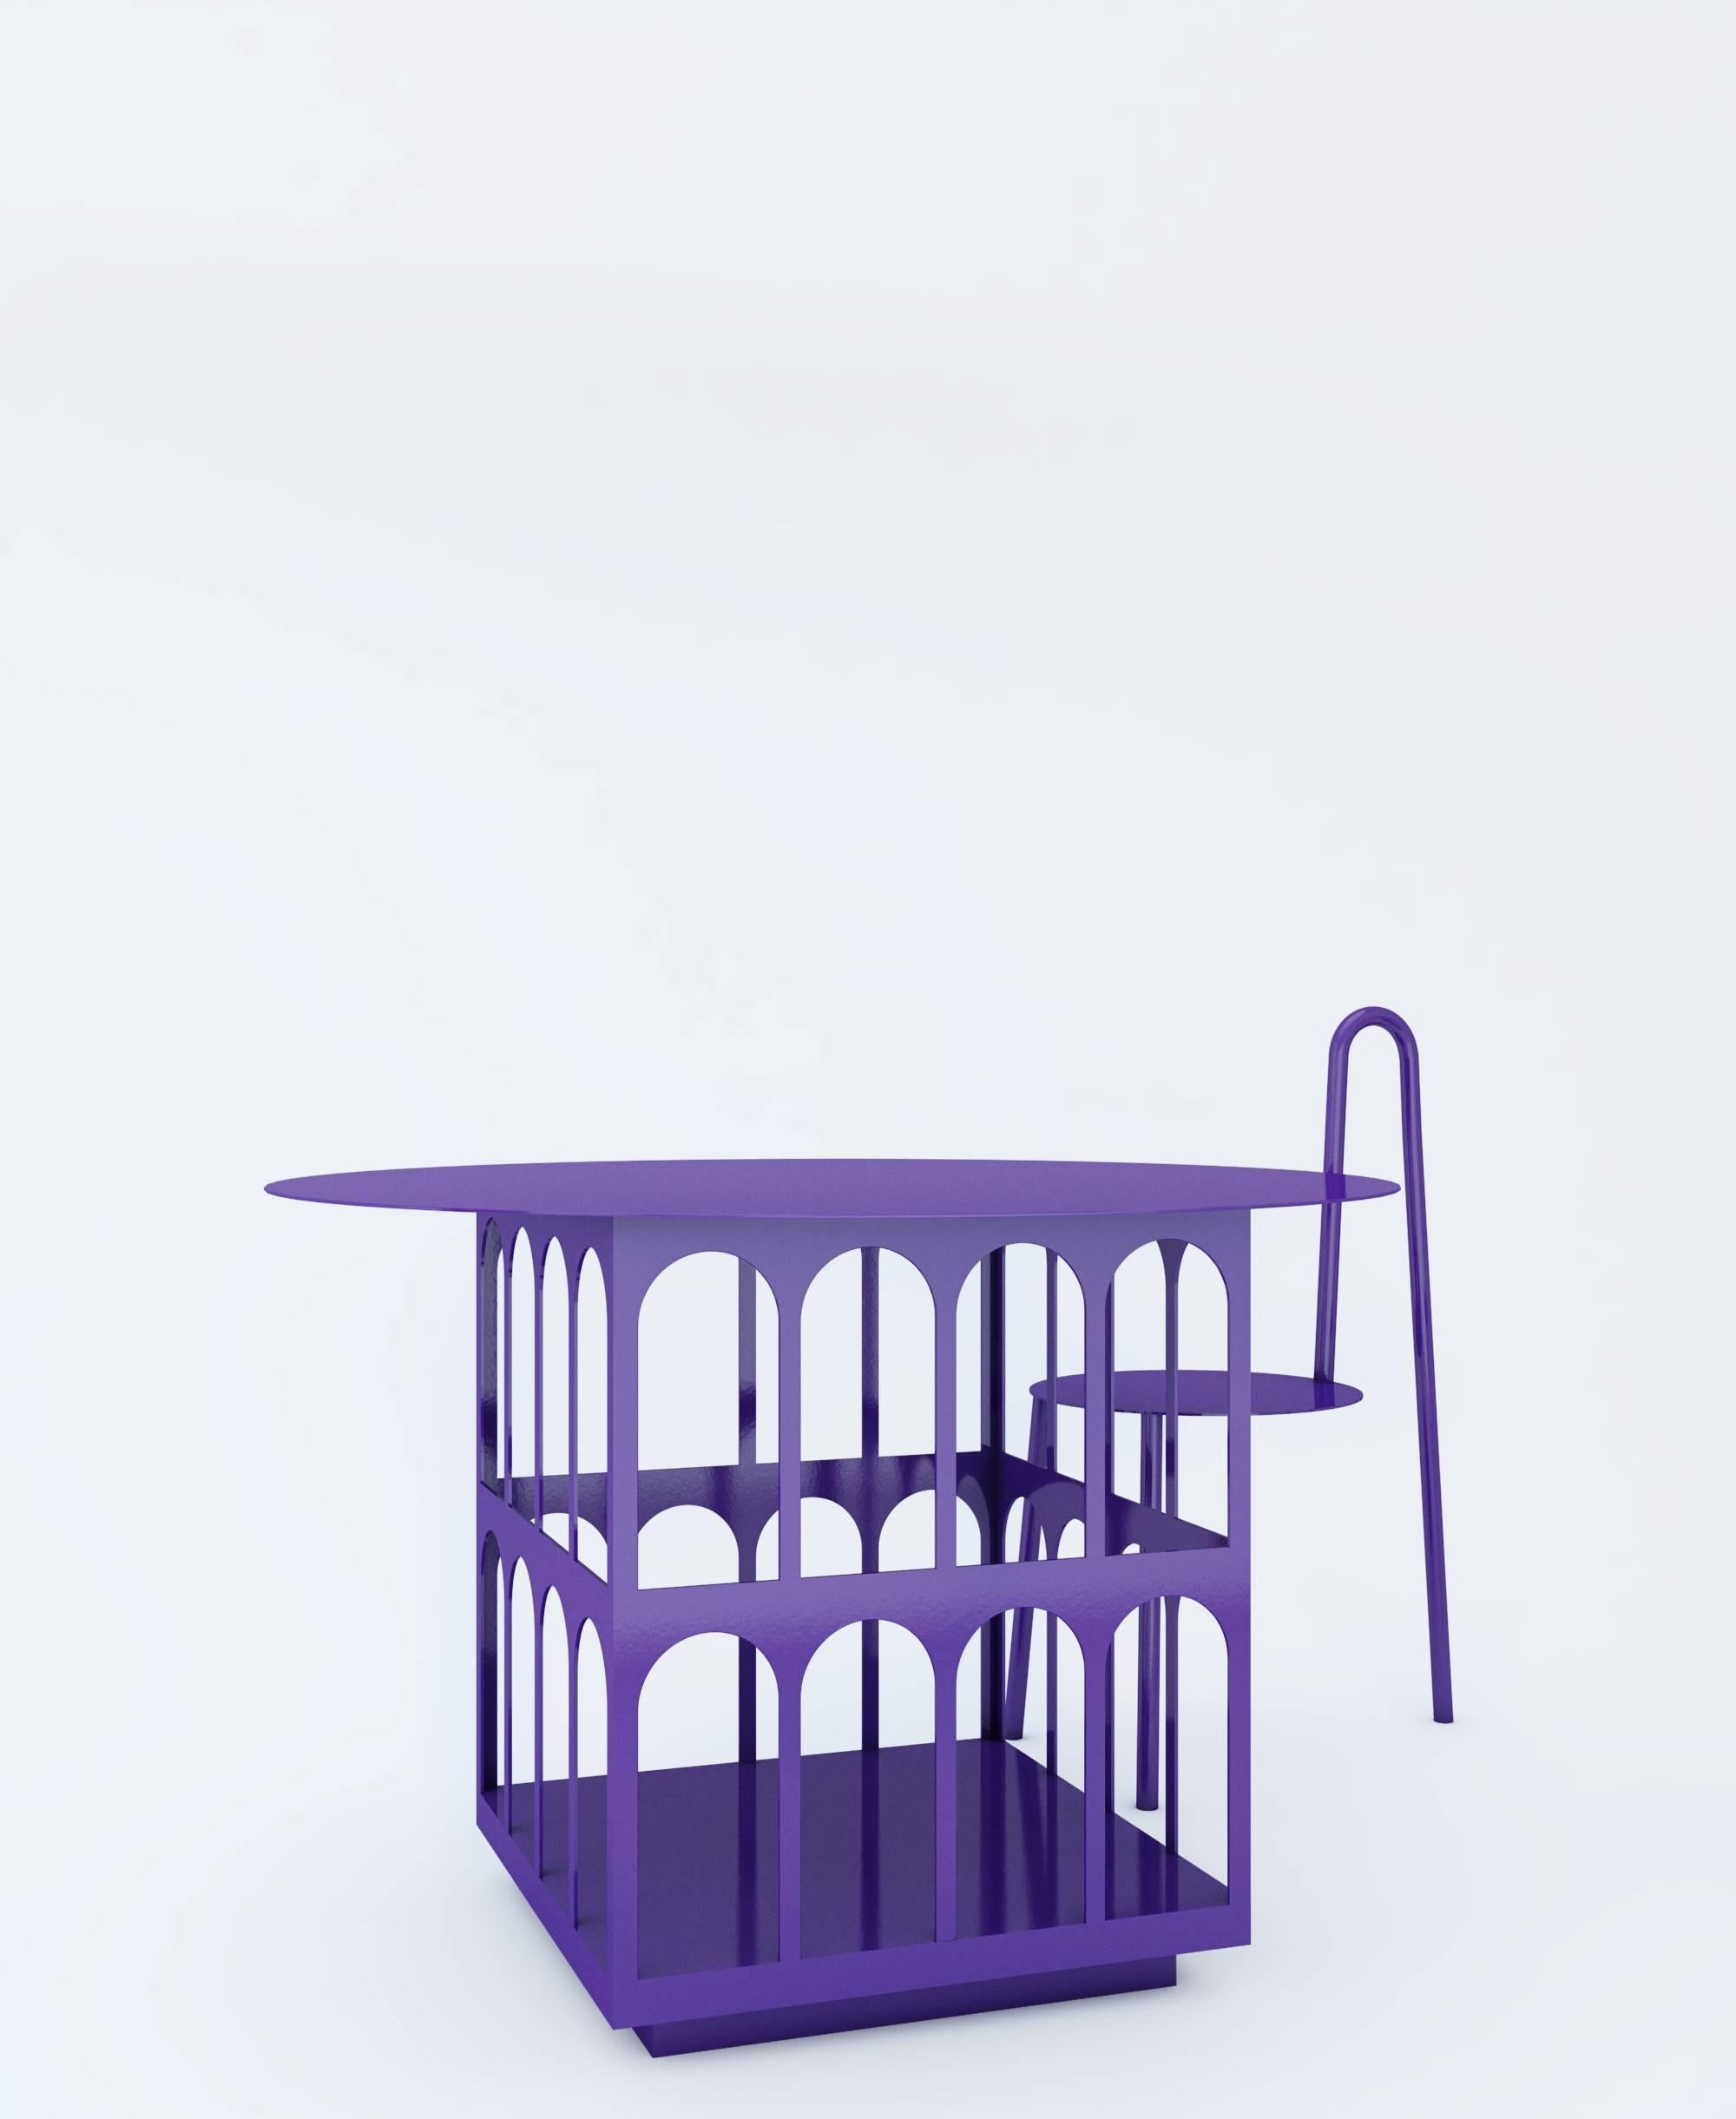 Minimalist Contemporary Chair by Crosby Studios, Metal with Purple Powder Coating, 2018 For Sale